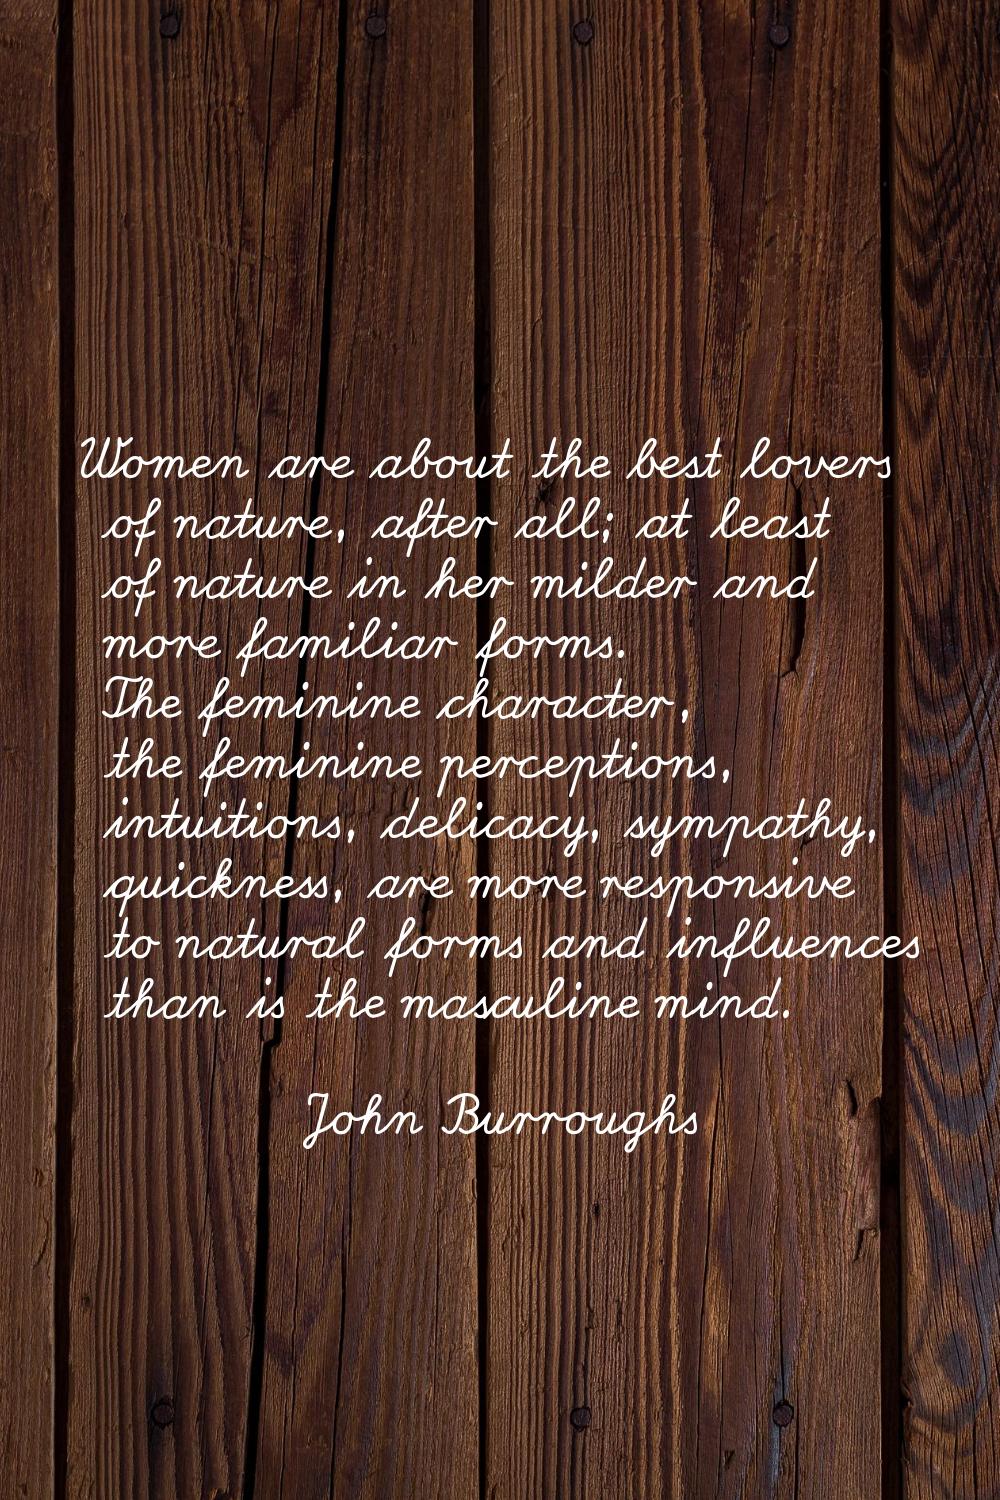 Women are about the best lovers of nature, after all; at least of nature in her milder and more fam